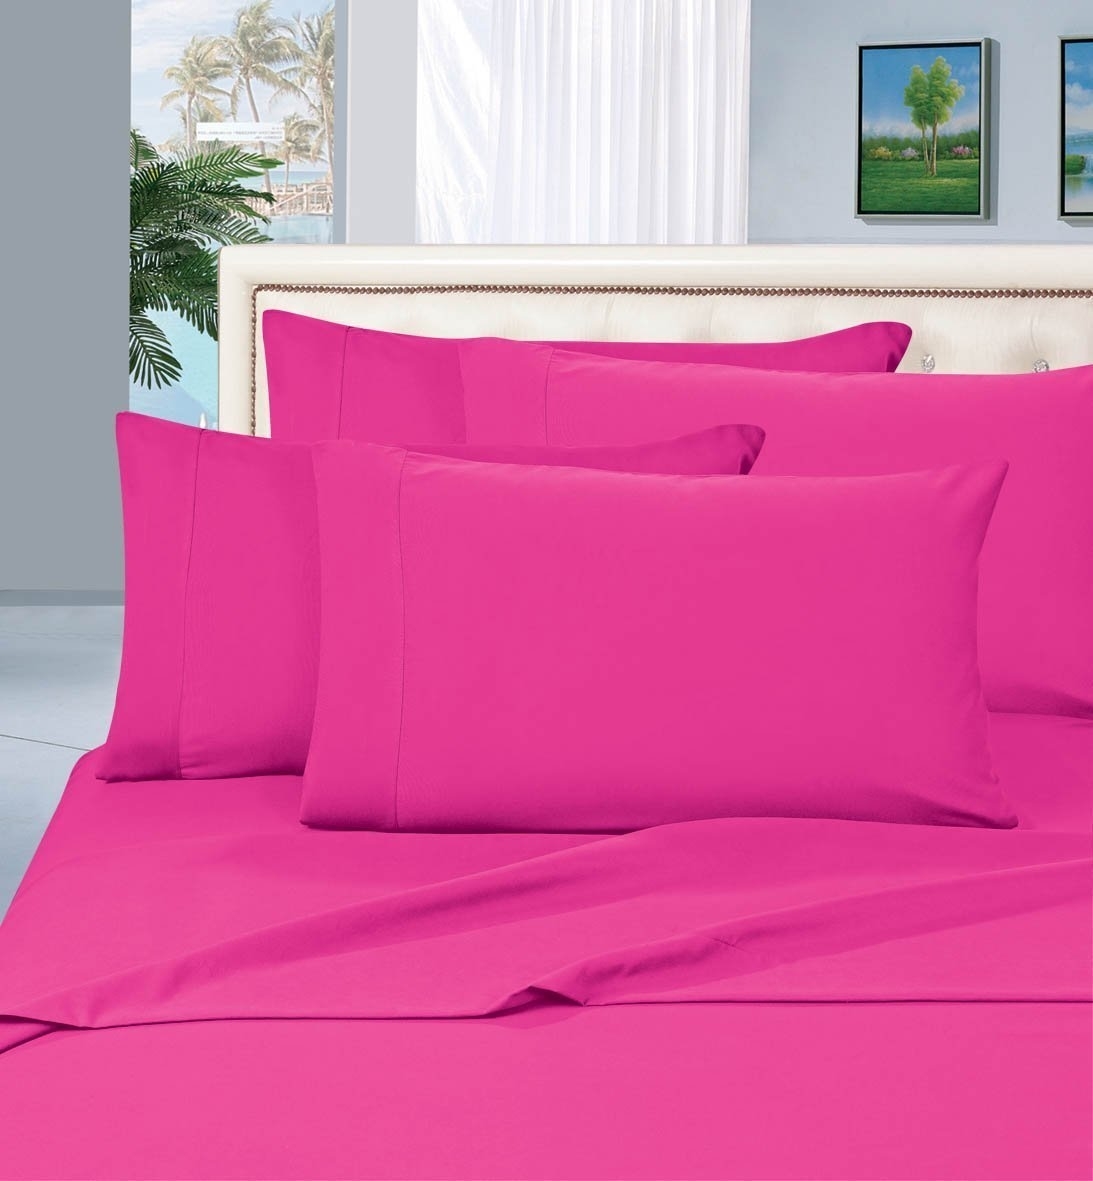 Elegant Comfort 1500 Series Wrinkle Resistant Egyptian Quality Hypoallergenic Ultra Soft Luxury 4-piece Bed Sheet Set, Queen, Hot Pink